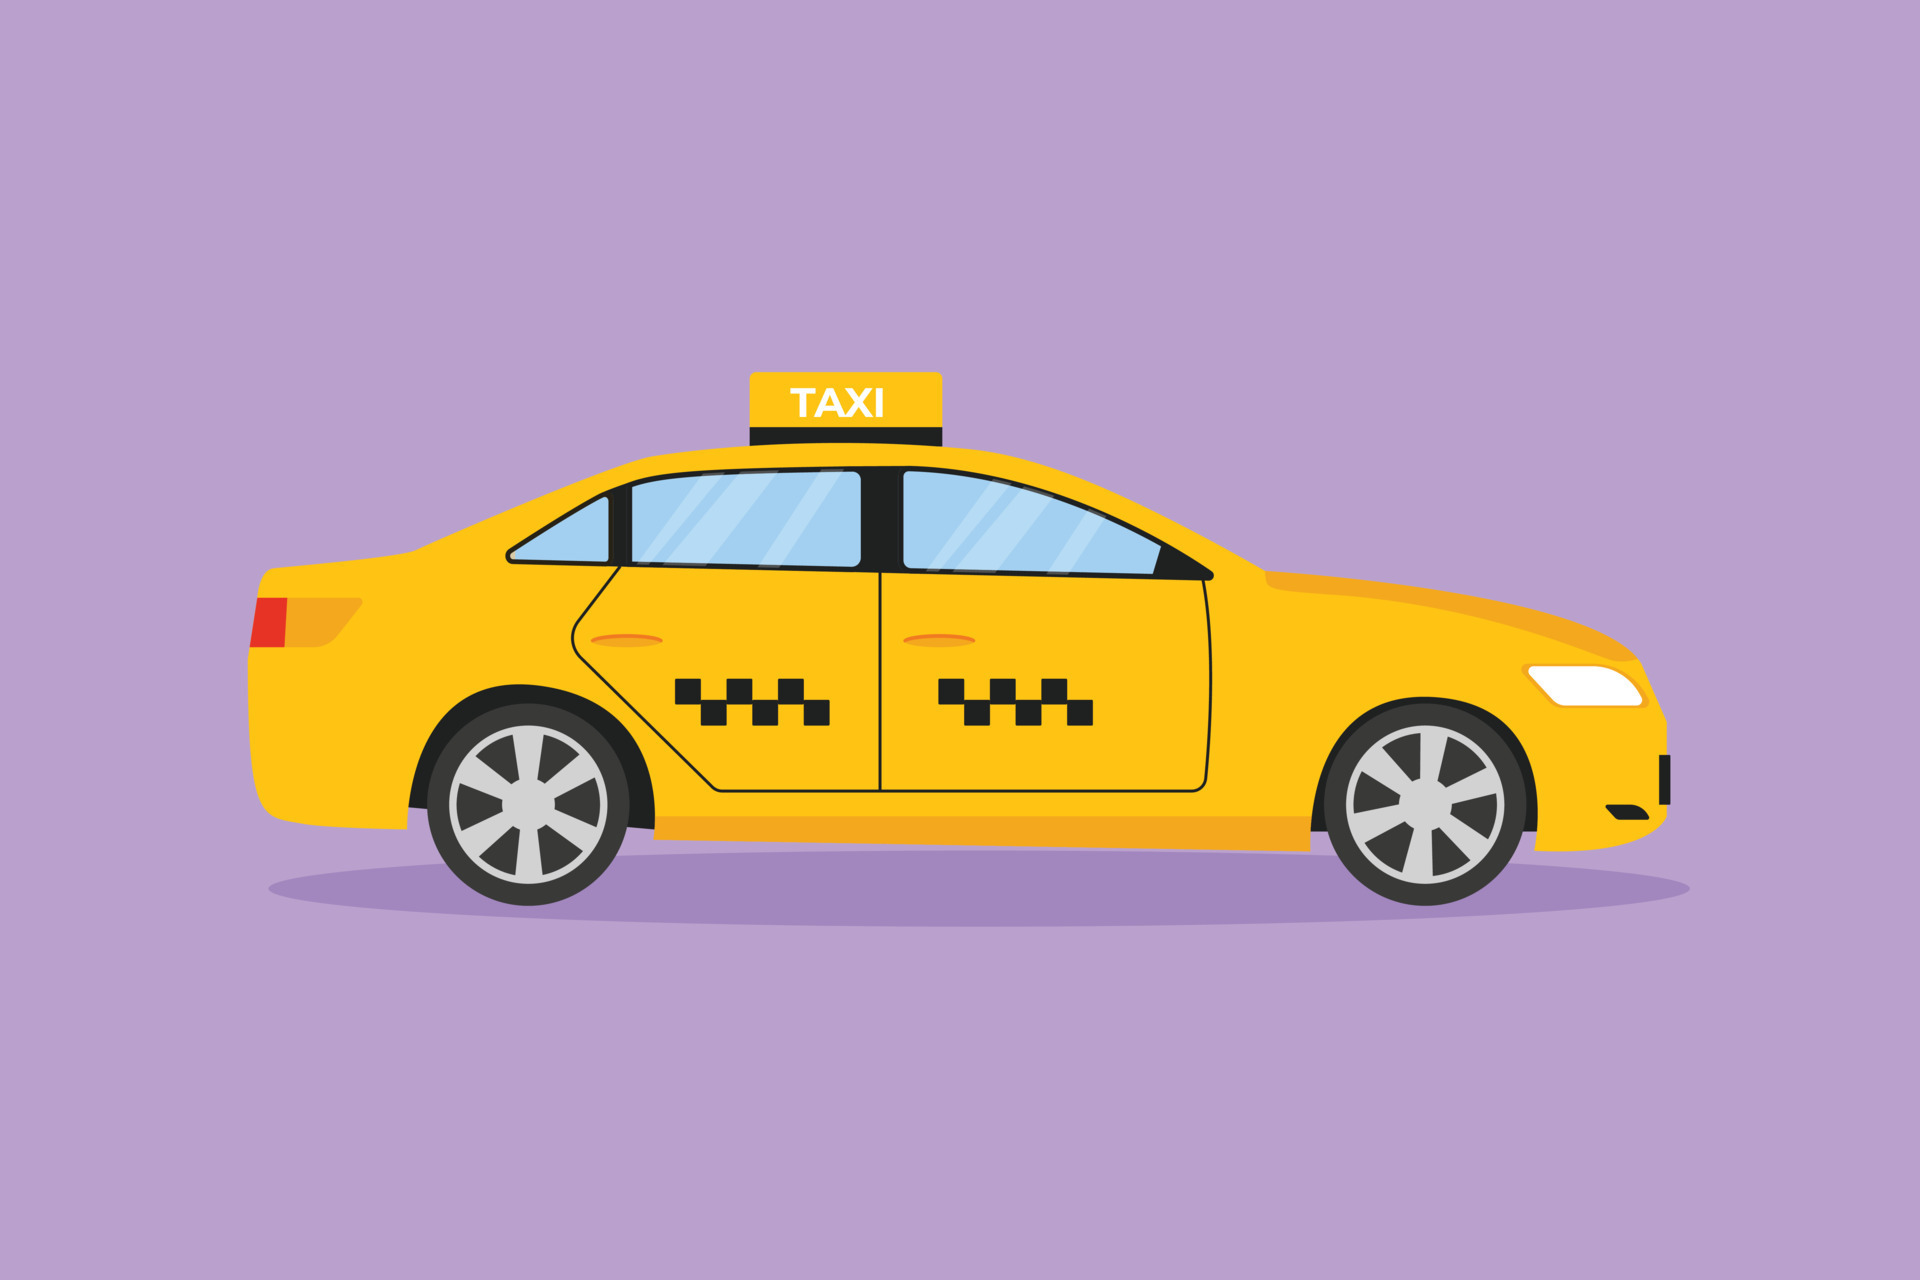 Cartoon flat style drawing newest modern taxi car uses a meter, GPS, and  can be ordered online. Technological advances in transportation. Vehicle in  urban lifestyle. Graphic design vector illustration 15087561 Vector Art